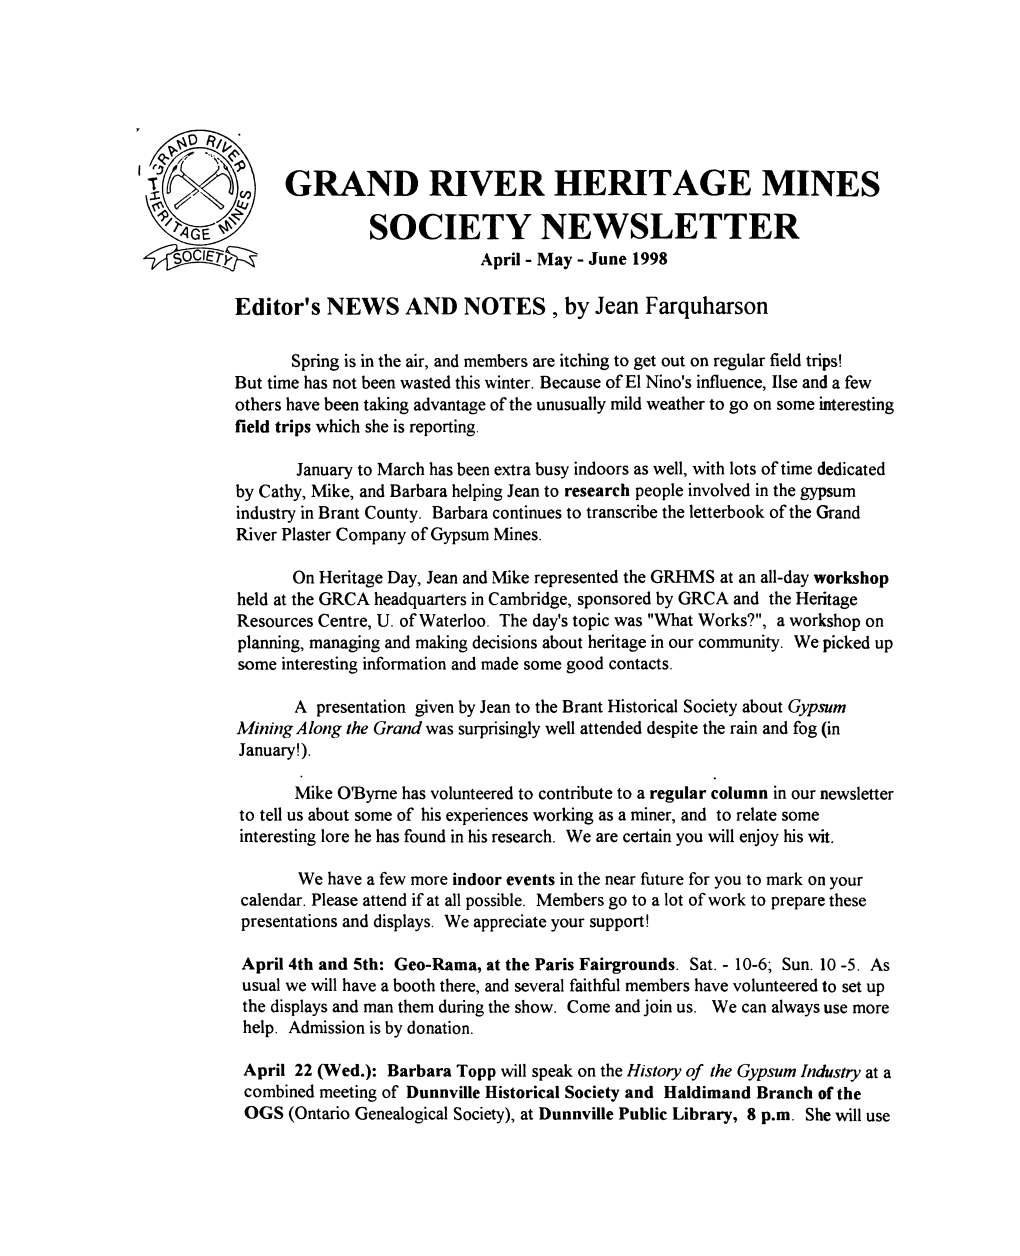 GRAND RIVER HERITAGE MINES SOCIETY NEWSLETTER April- May - June 1998